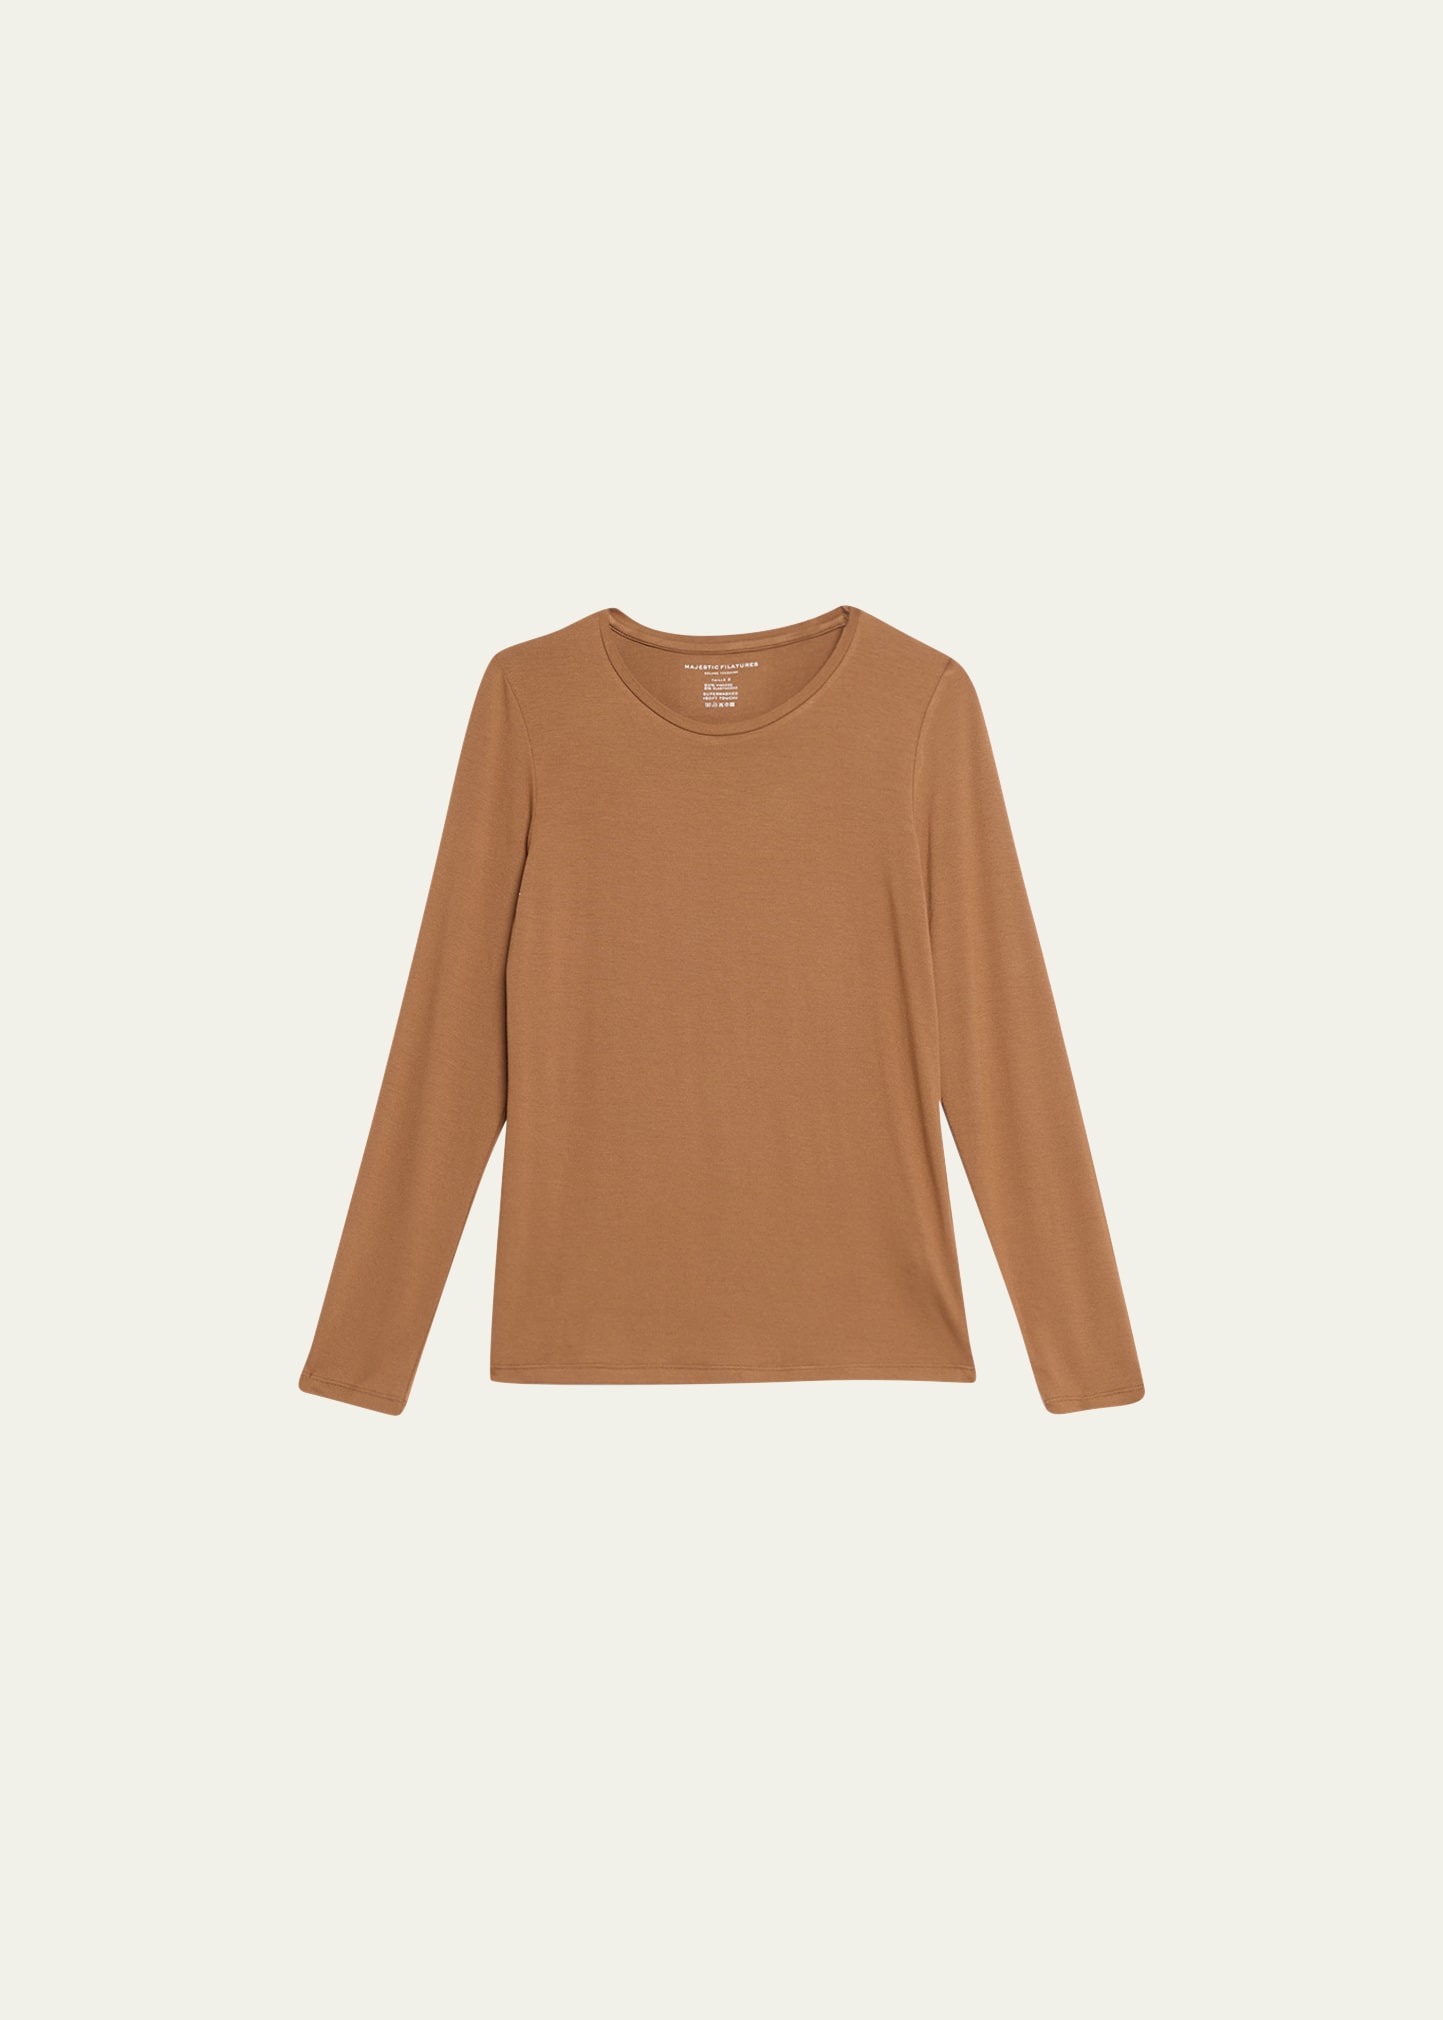 Majestic Soft Touch Flat-edge Long-sleeve Crewneck Top In Bison